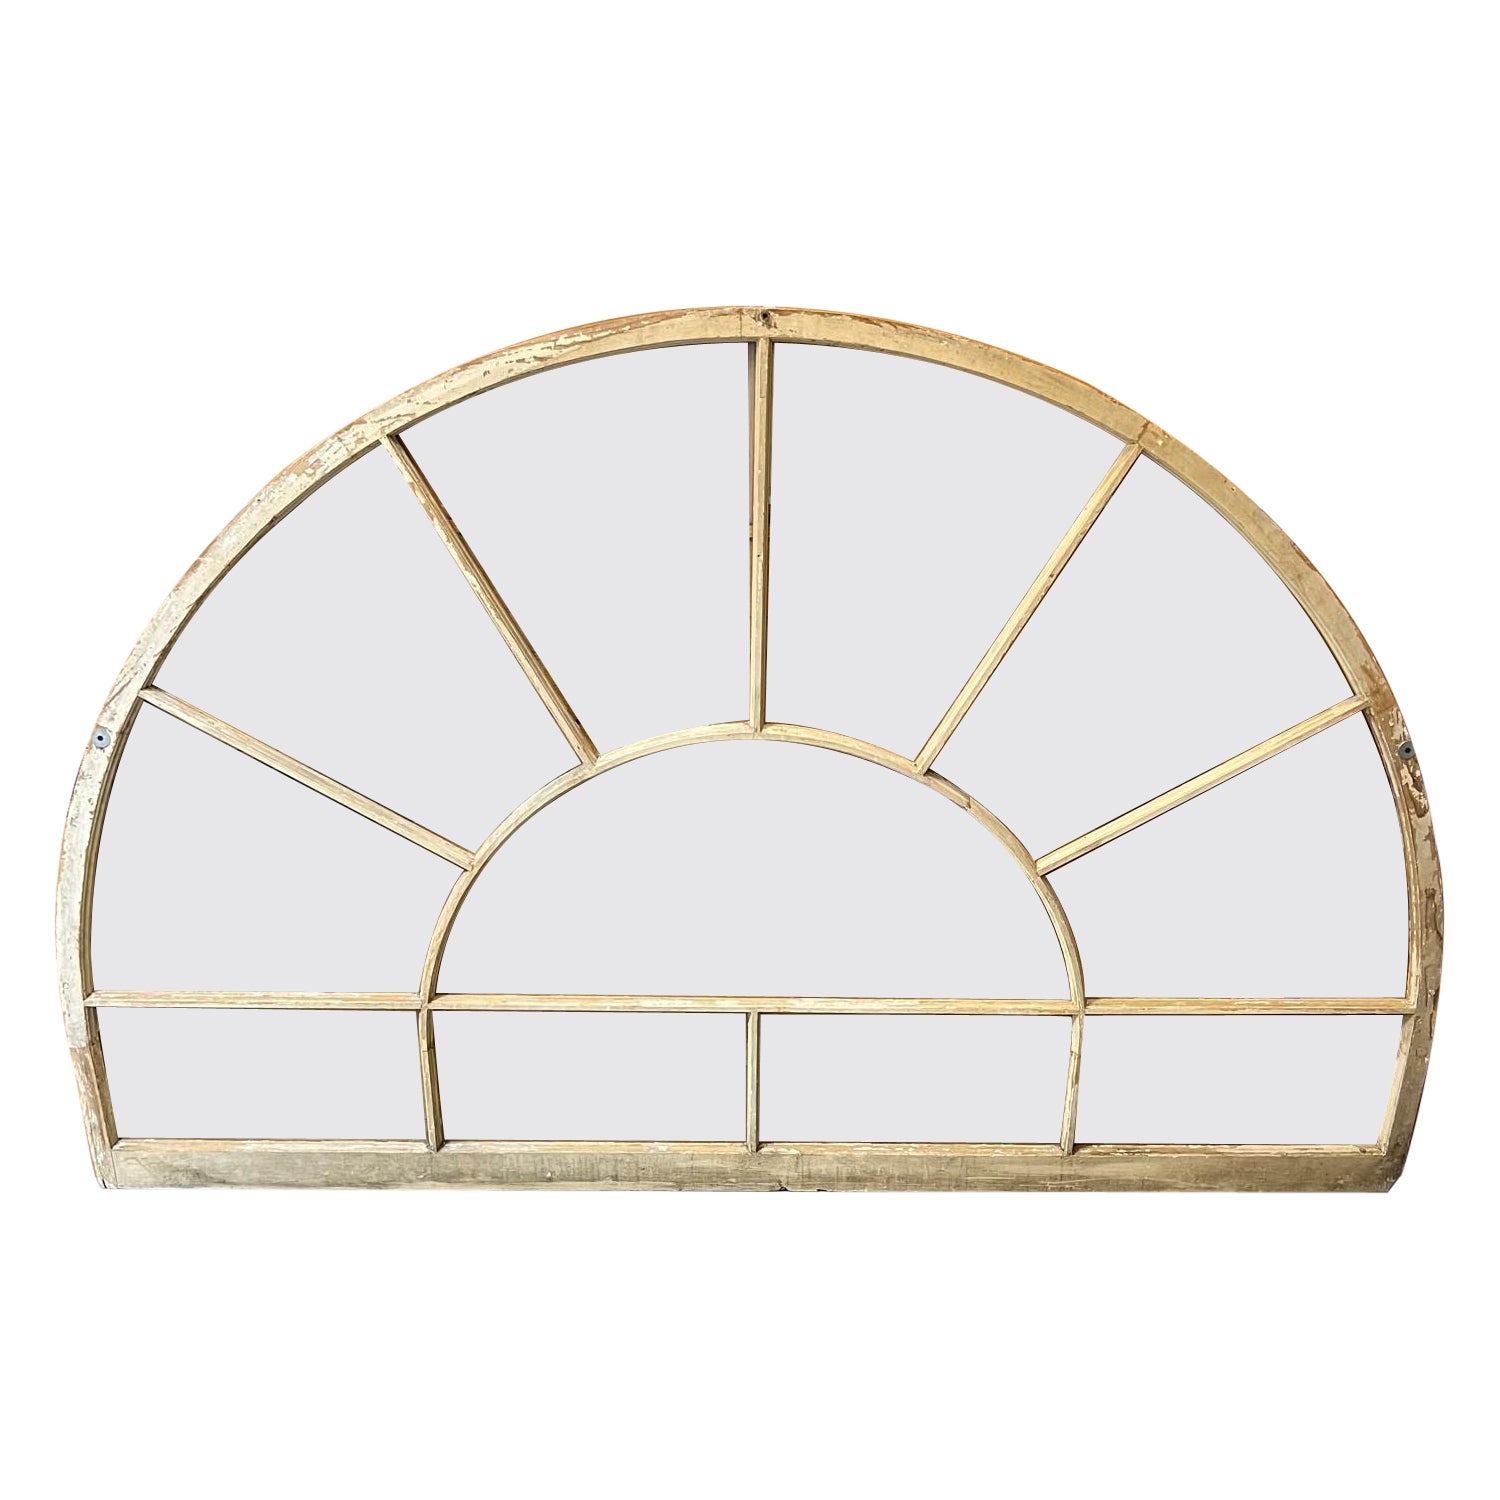 Oversize Antique Arch Top Transom Window, 11 Panes Original Glass Wood Muntin For Sale